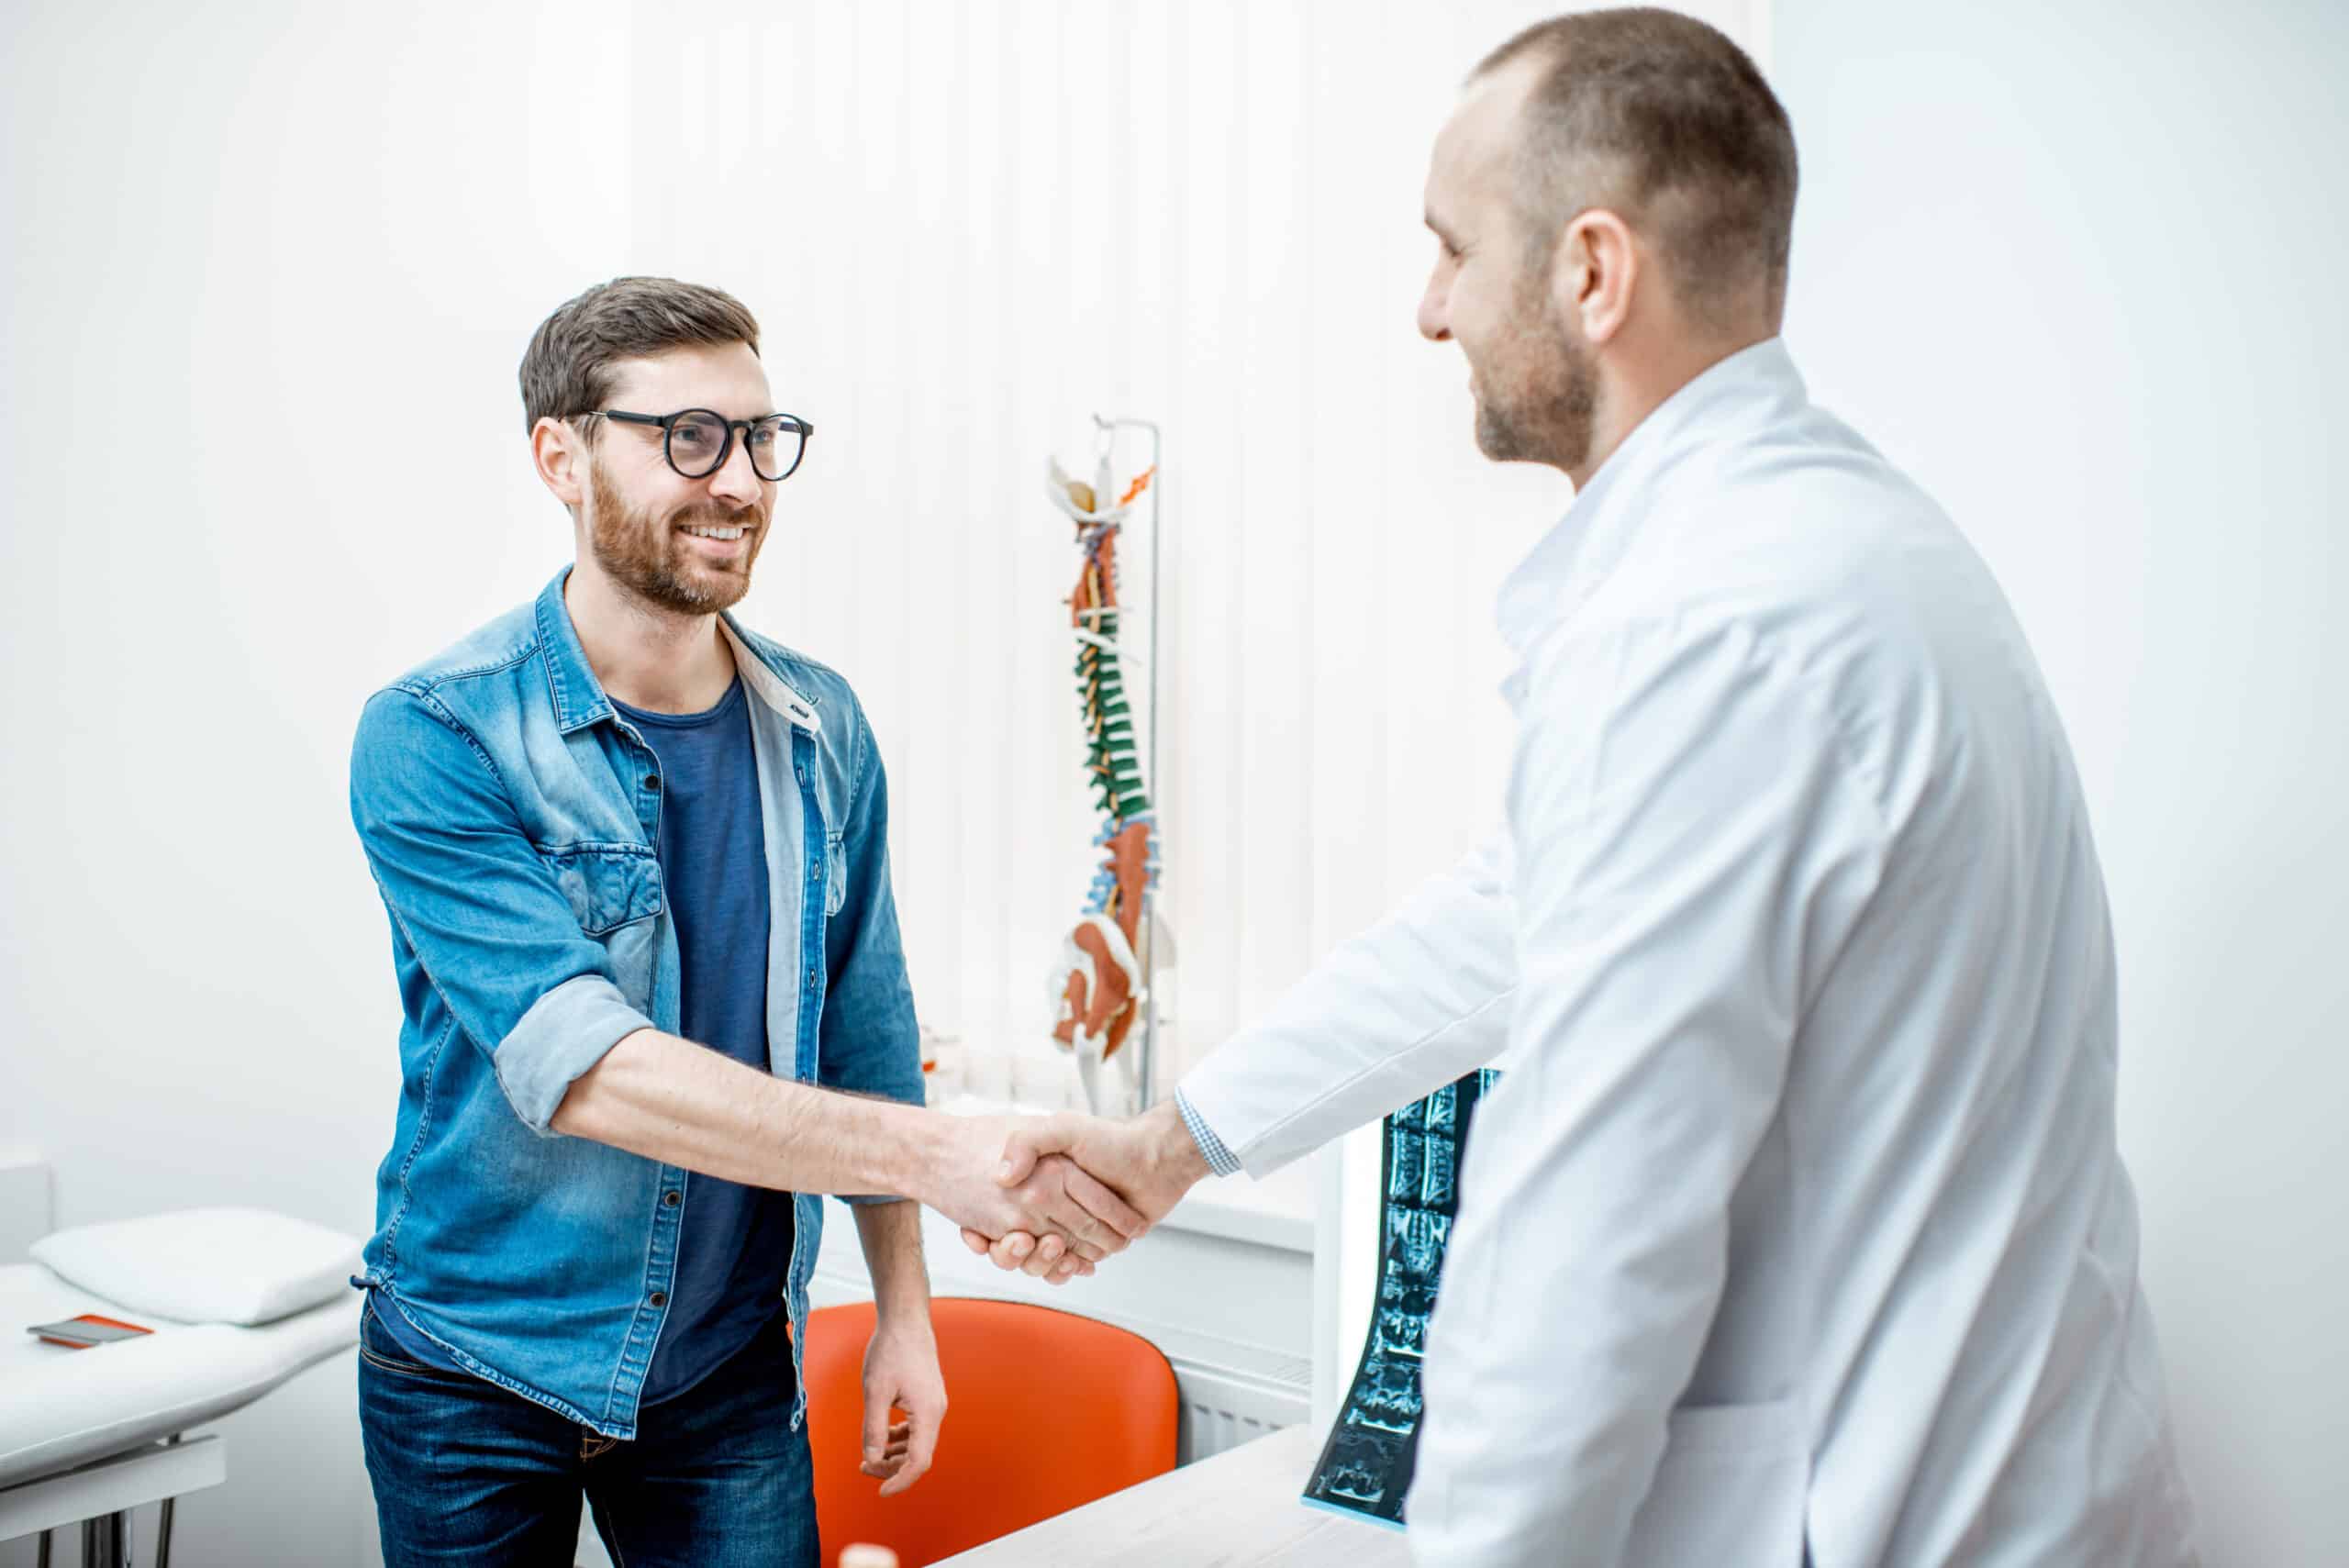 Patient handshaking with doctor at the office